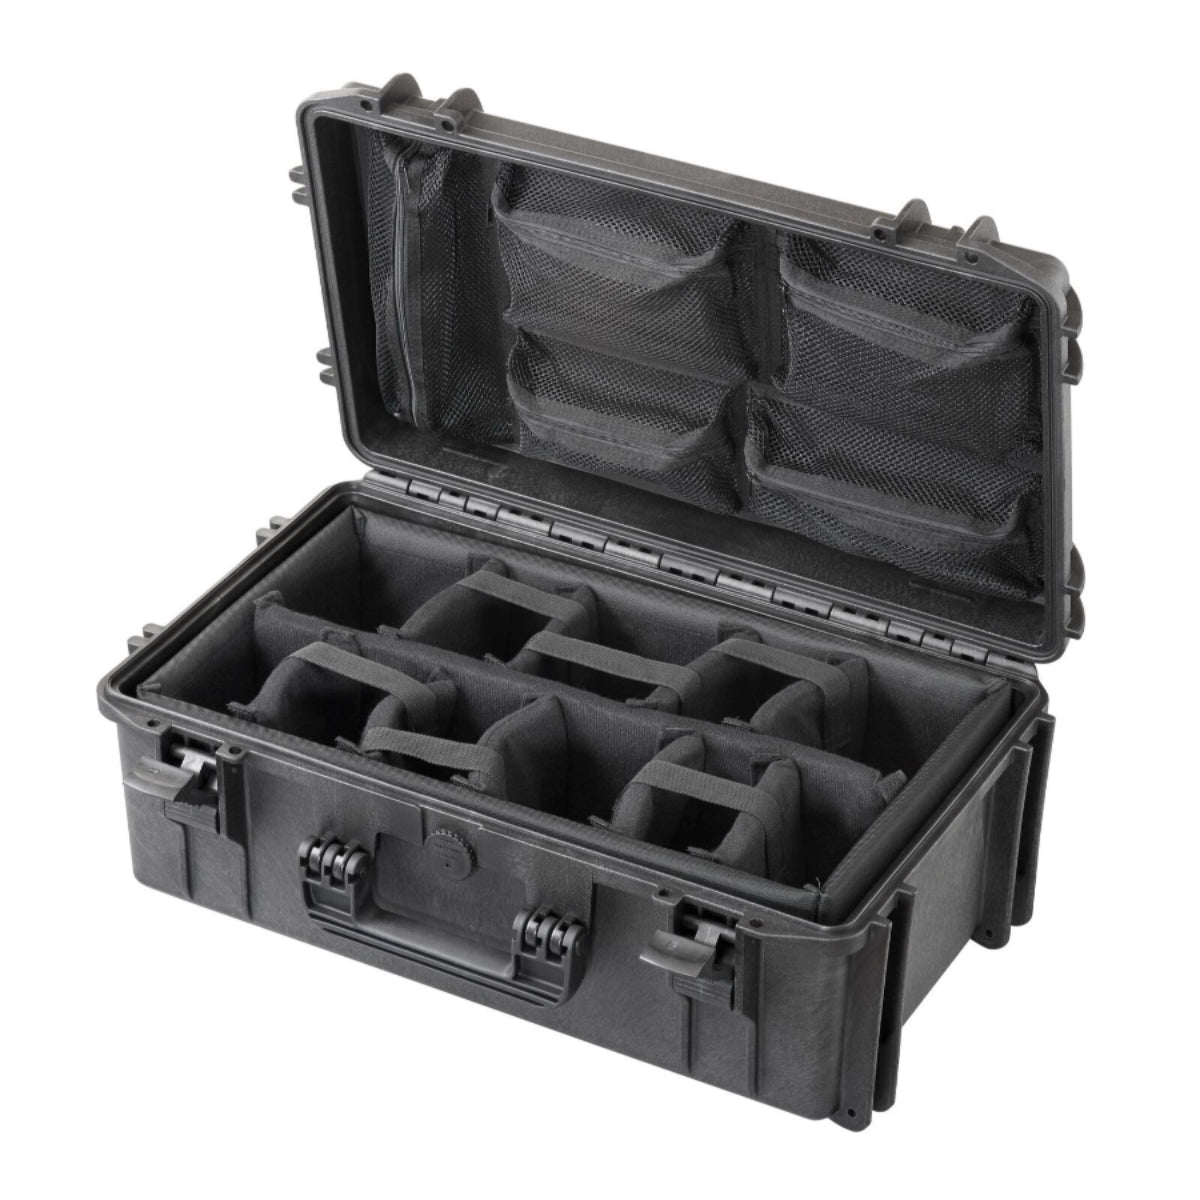 SP PRO 520CAMORG Black Carry Case, Padded Dividers + Lid Organizer, ID: L520xW290xH200mm